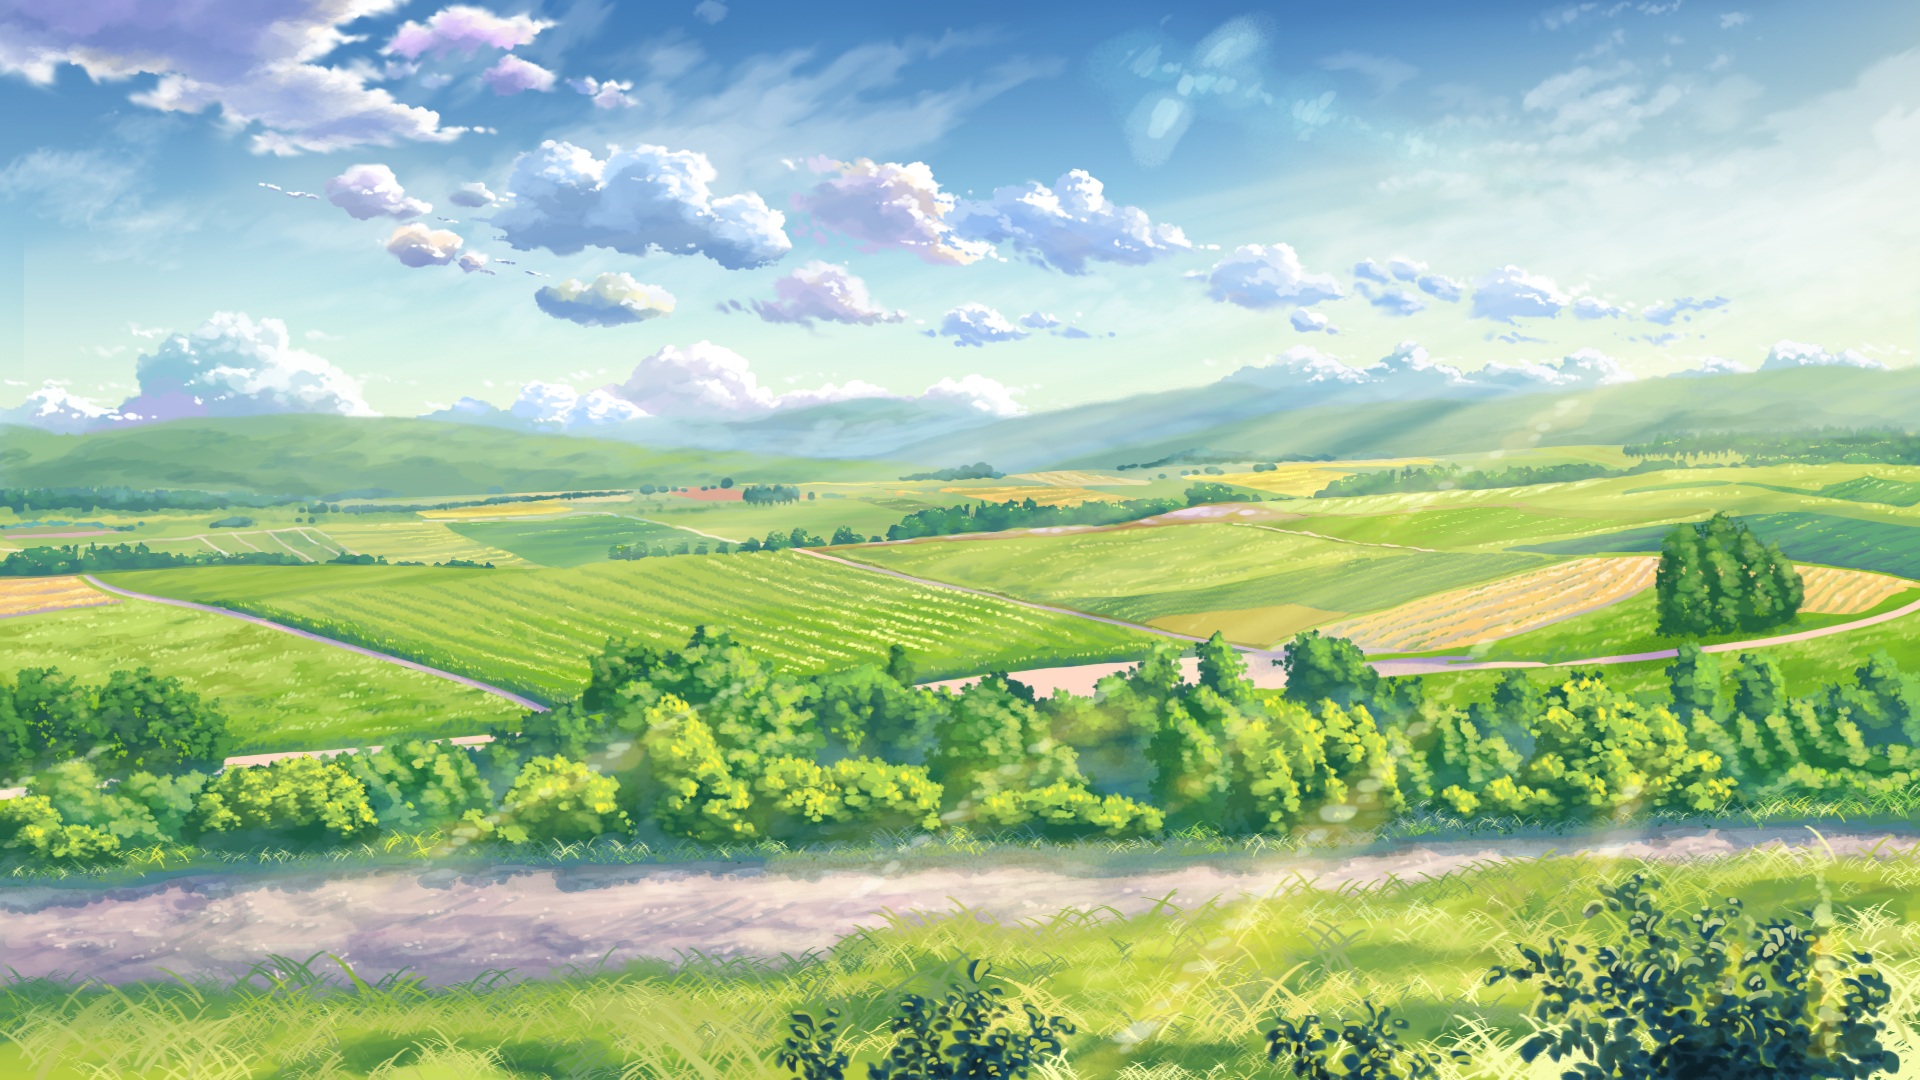 129,093 Anime Background Images, Stock Photos & Vectors | Shutterstock